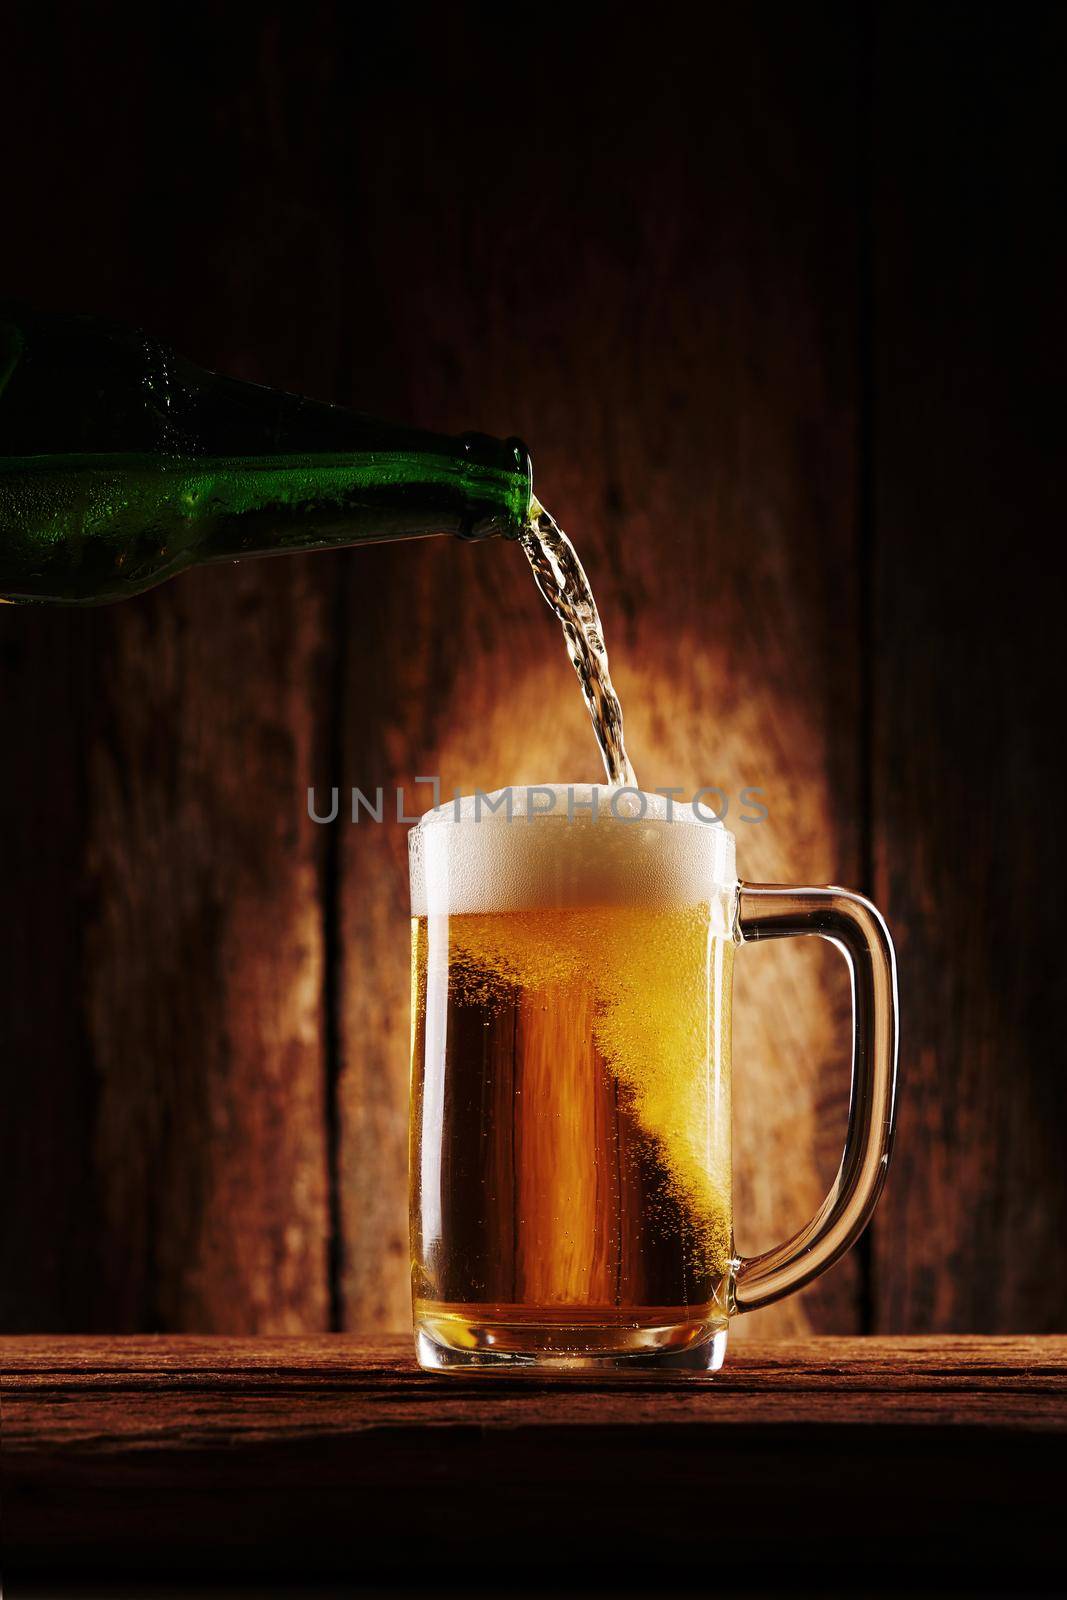 Pouring beer into the glass by Wasant